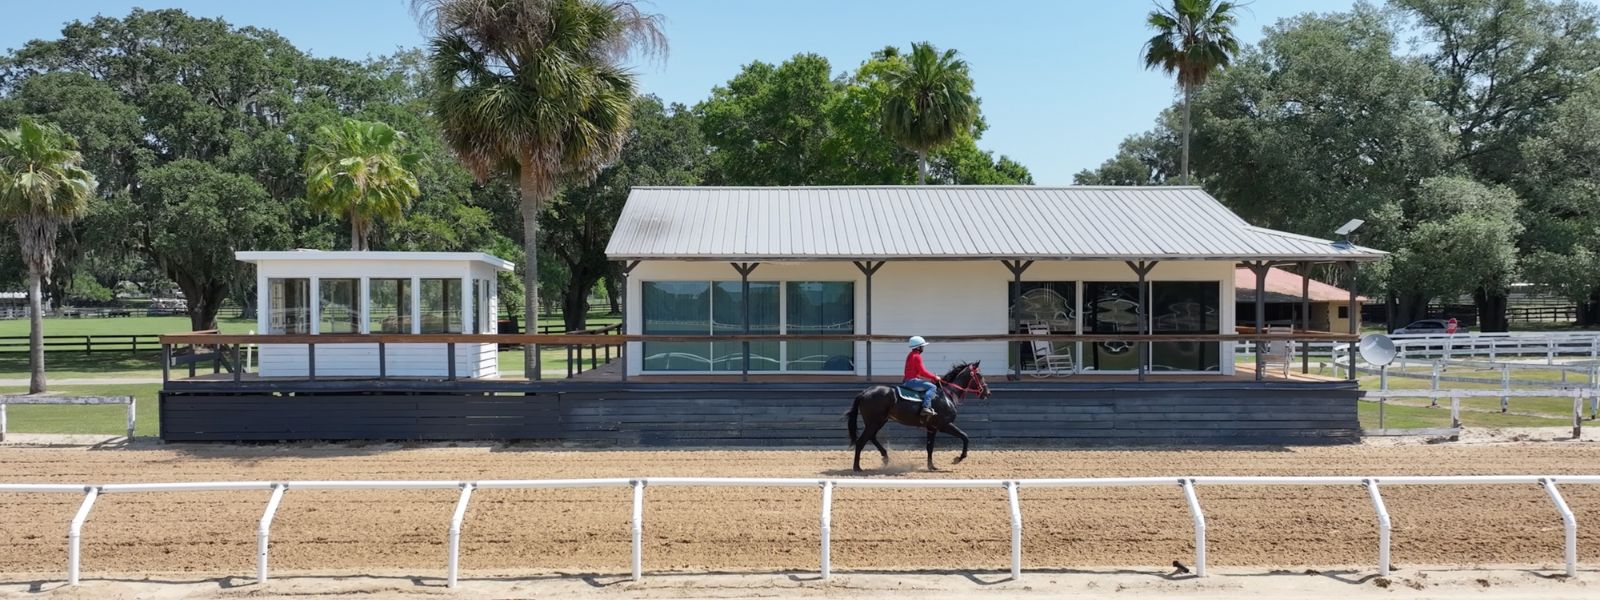 thoroughbred horse race practice in florida